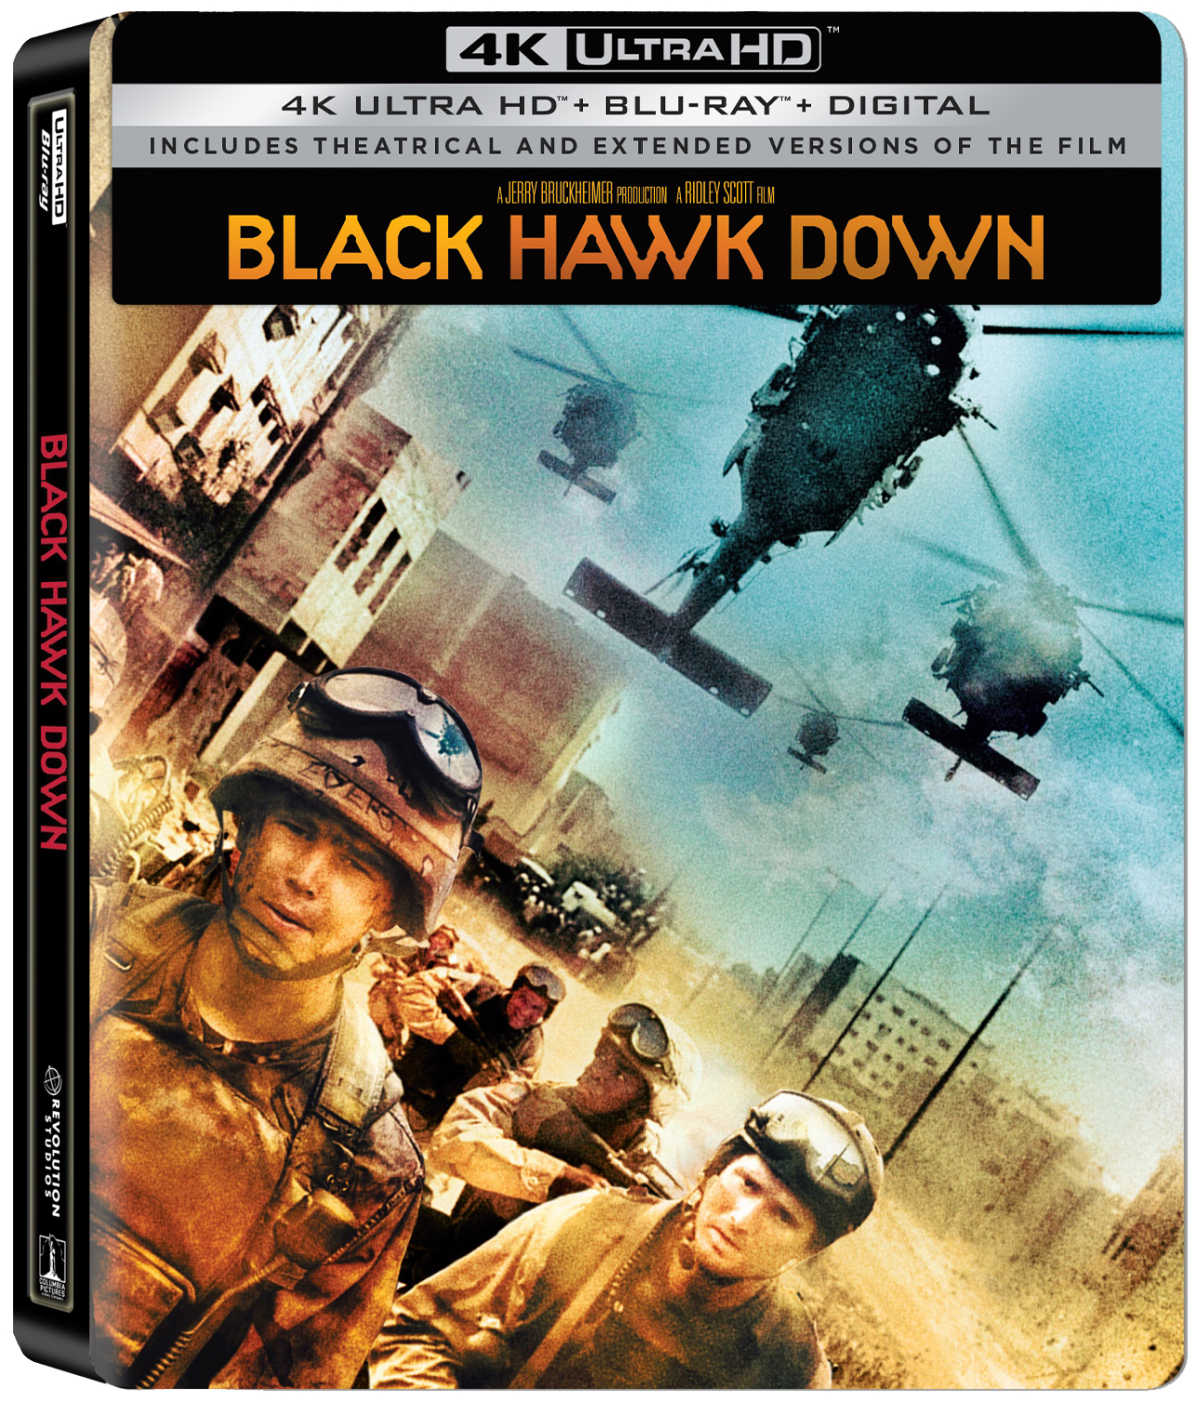 Prepare to be transported back to the streets of Mogadishu, Somalia, with the Black Hawk Down Steelbook. This collector's edition of Ridley Scott's critically acclaimed war film is now available in stunning 4K Ultra HD, offering an unparalleled viewing experience.